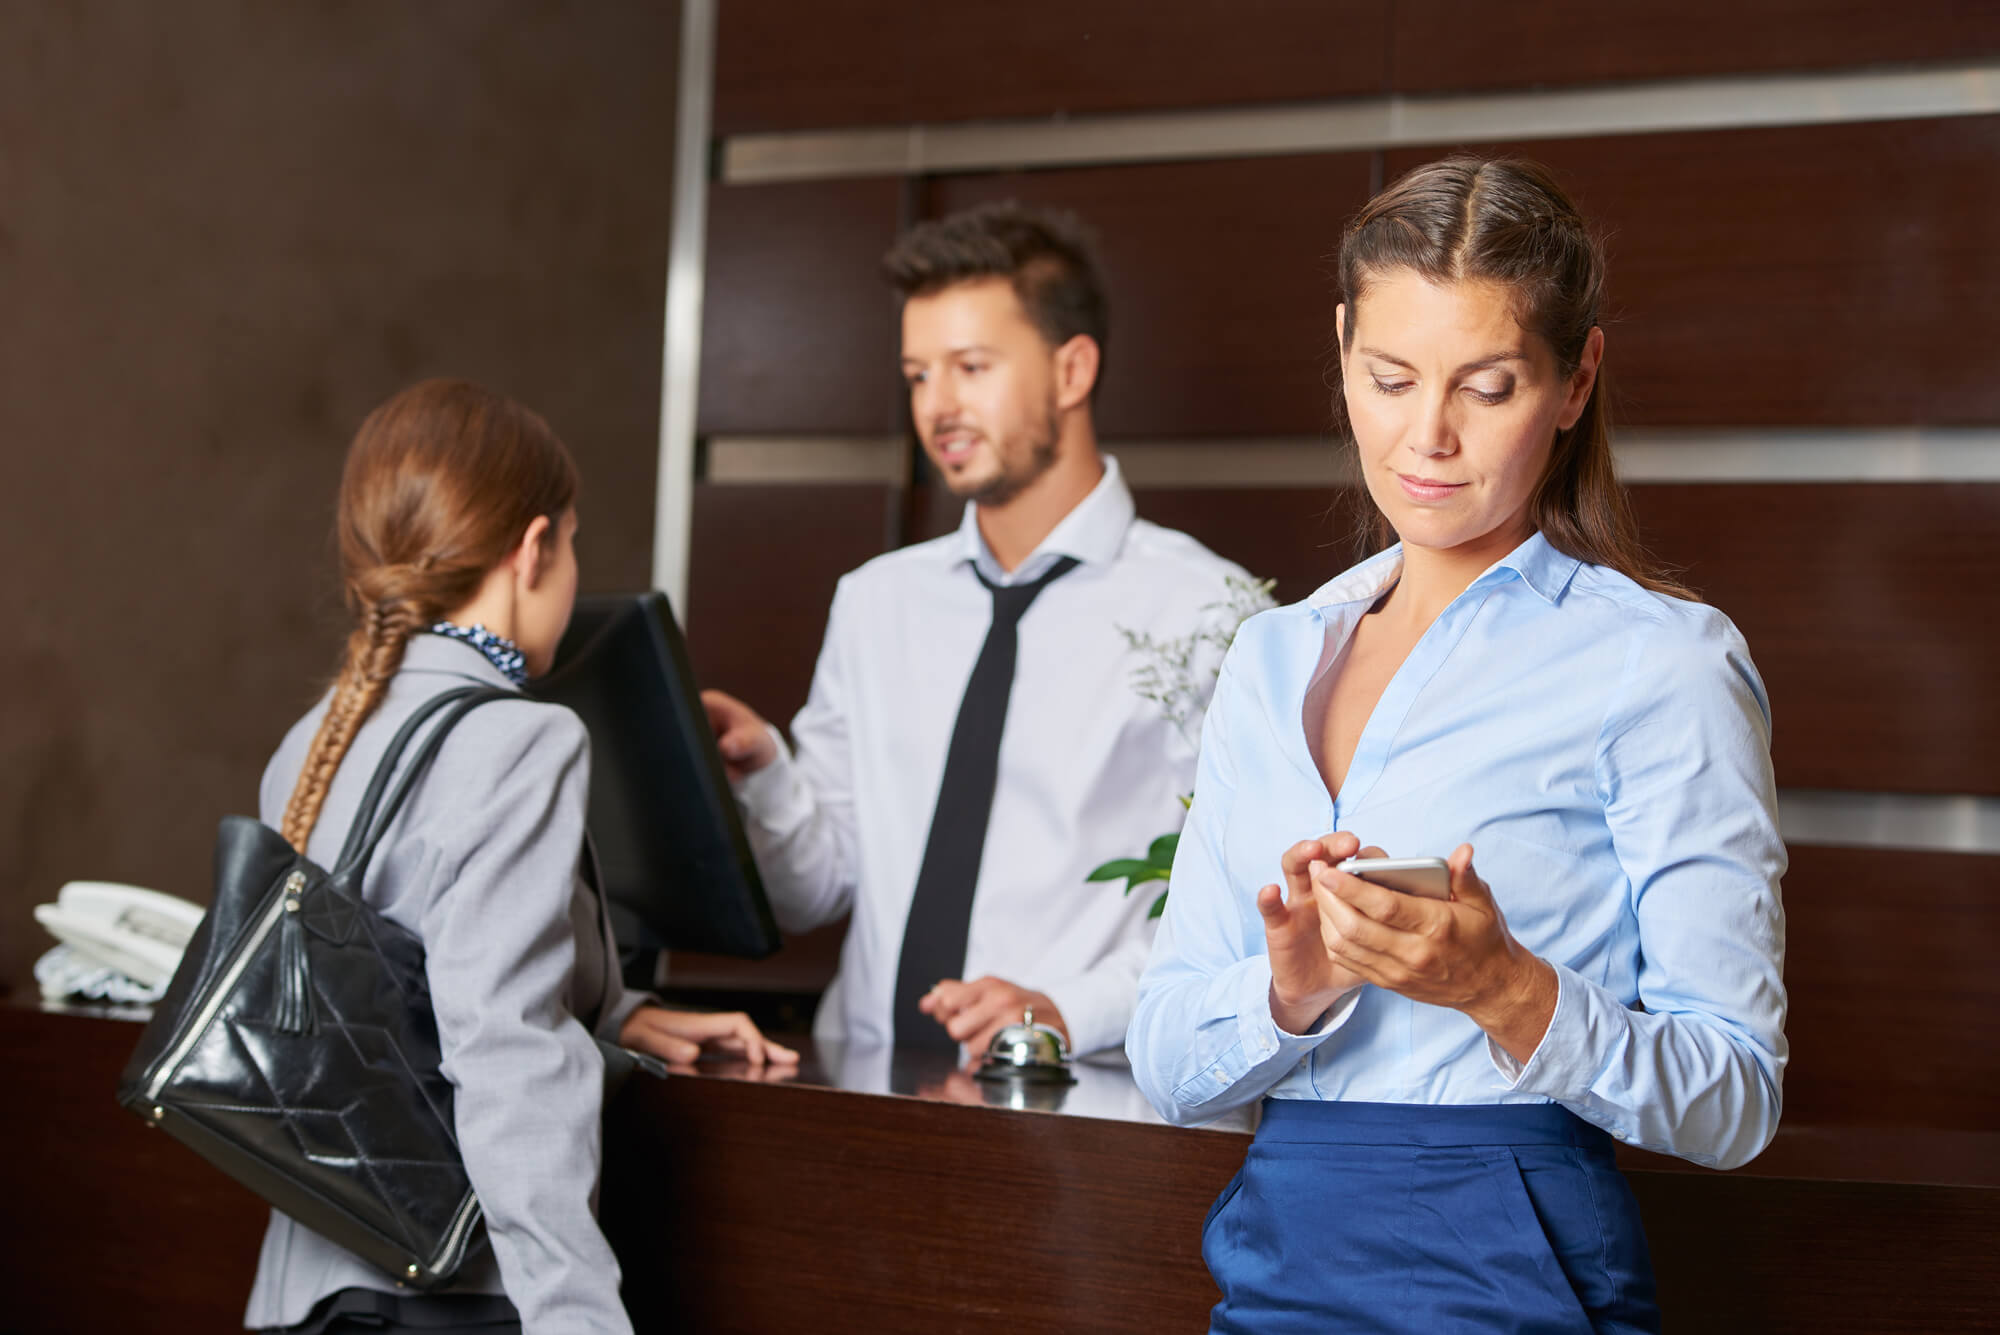 Hotels need to optimize mobile offerings